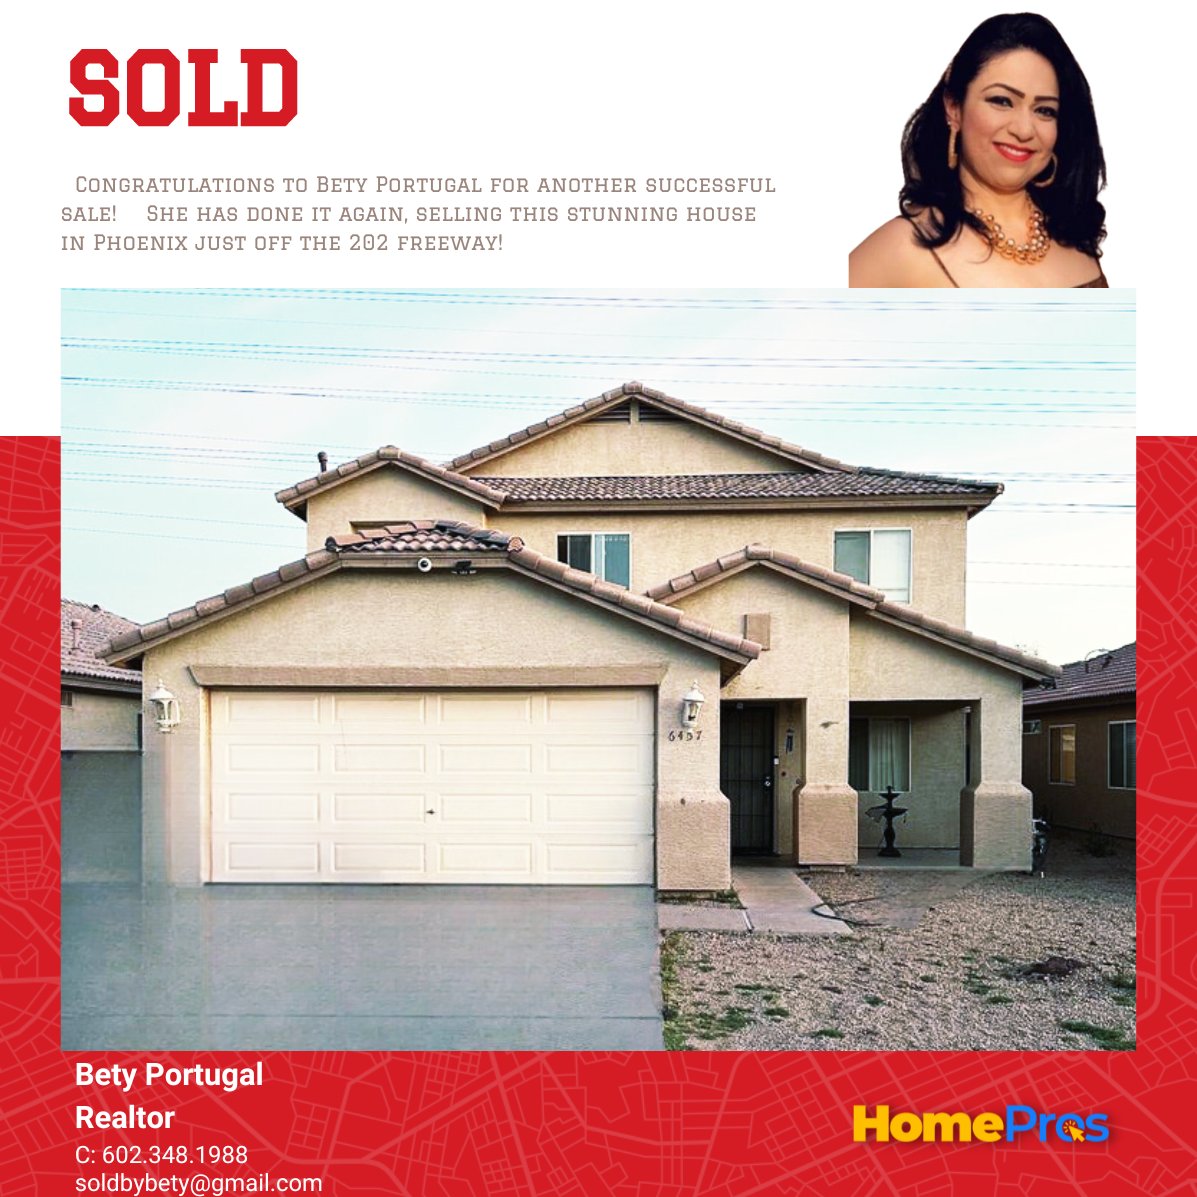 🎉 Congratulations to Bety Portugal for another successful sale! 🏡🔑 She has done it again, selling this stunning house in Phoenix just off the 202 freeway! 🌟✨

If you're looking to buy or sell a home in Phoenix, give us a call. 🤝 📲💙

#Congratulations #SuccessfulSale